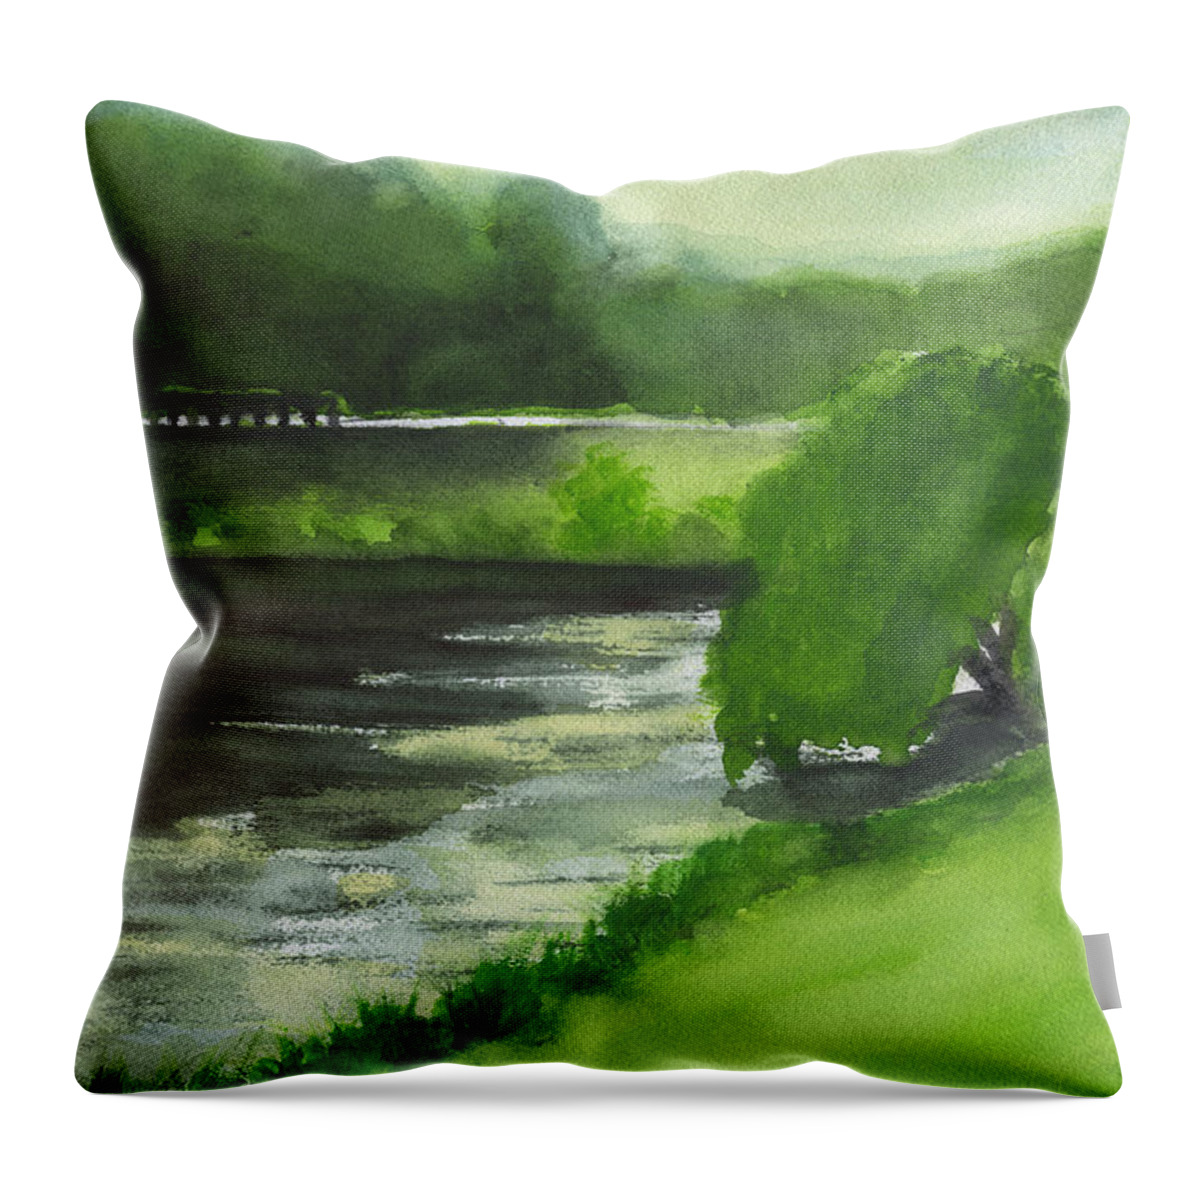 Lake Mayer Late Morning Throw Pillow featuring the painting Lake Mayer Late Morning by Frank Bright